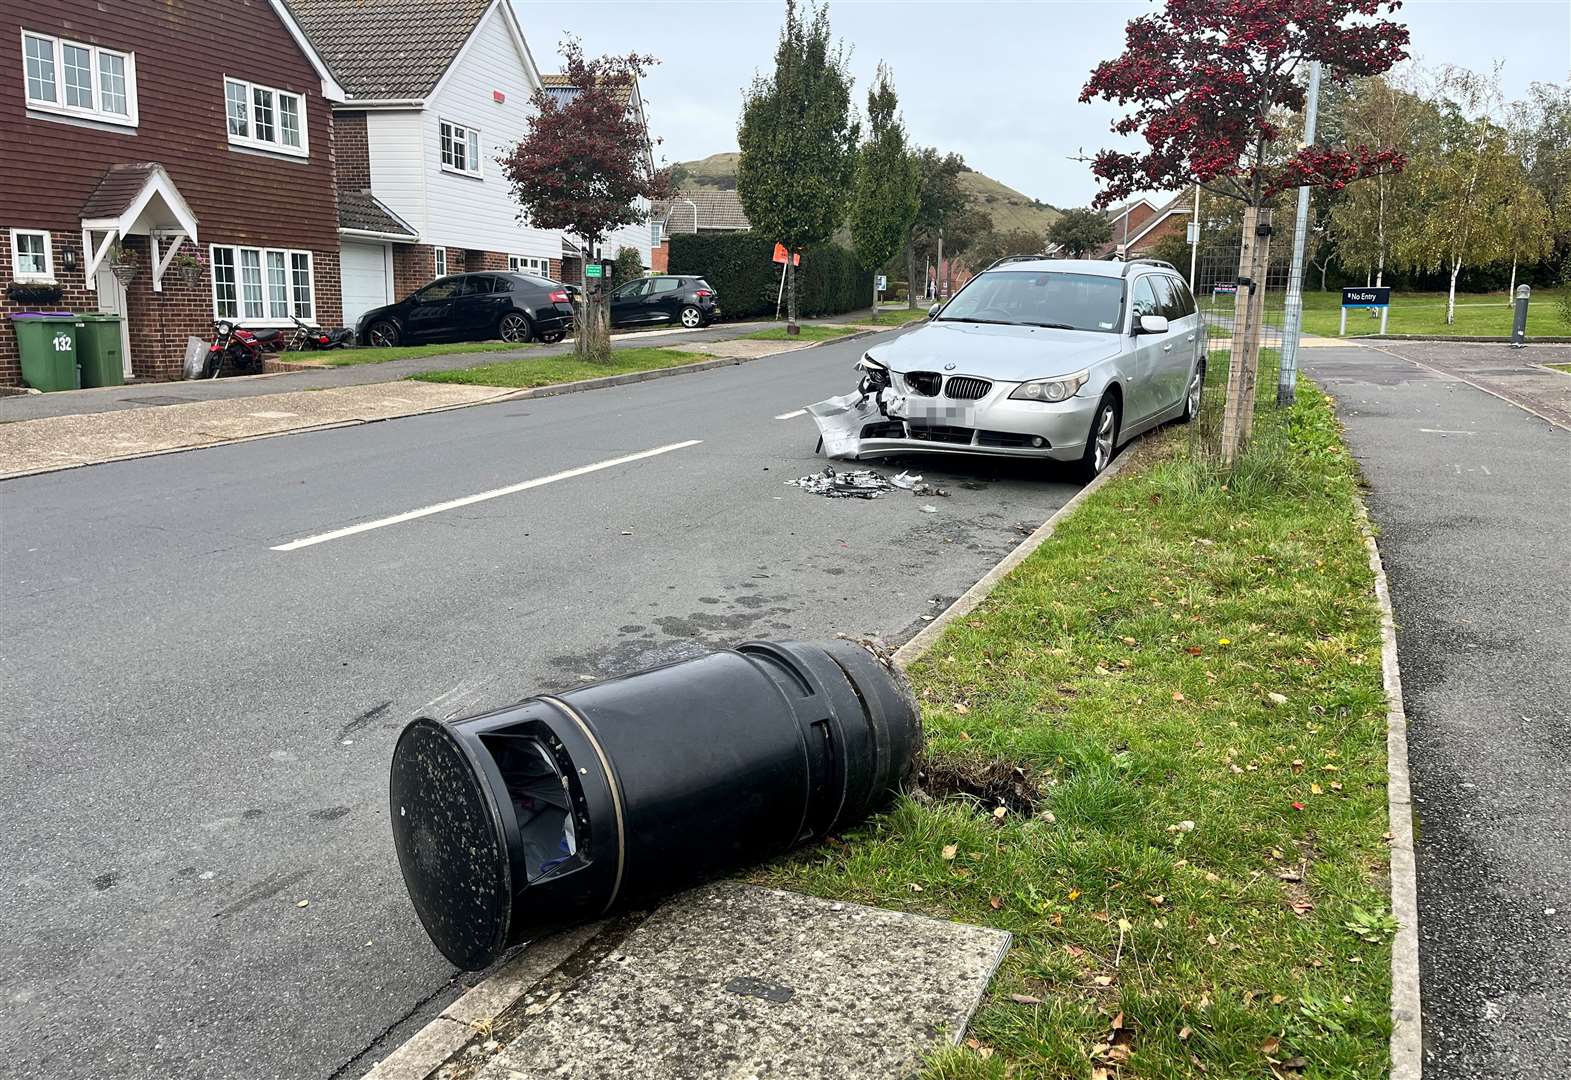 A bin was also taken out during the crash